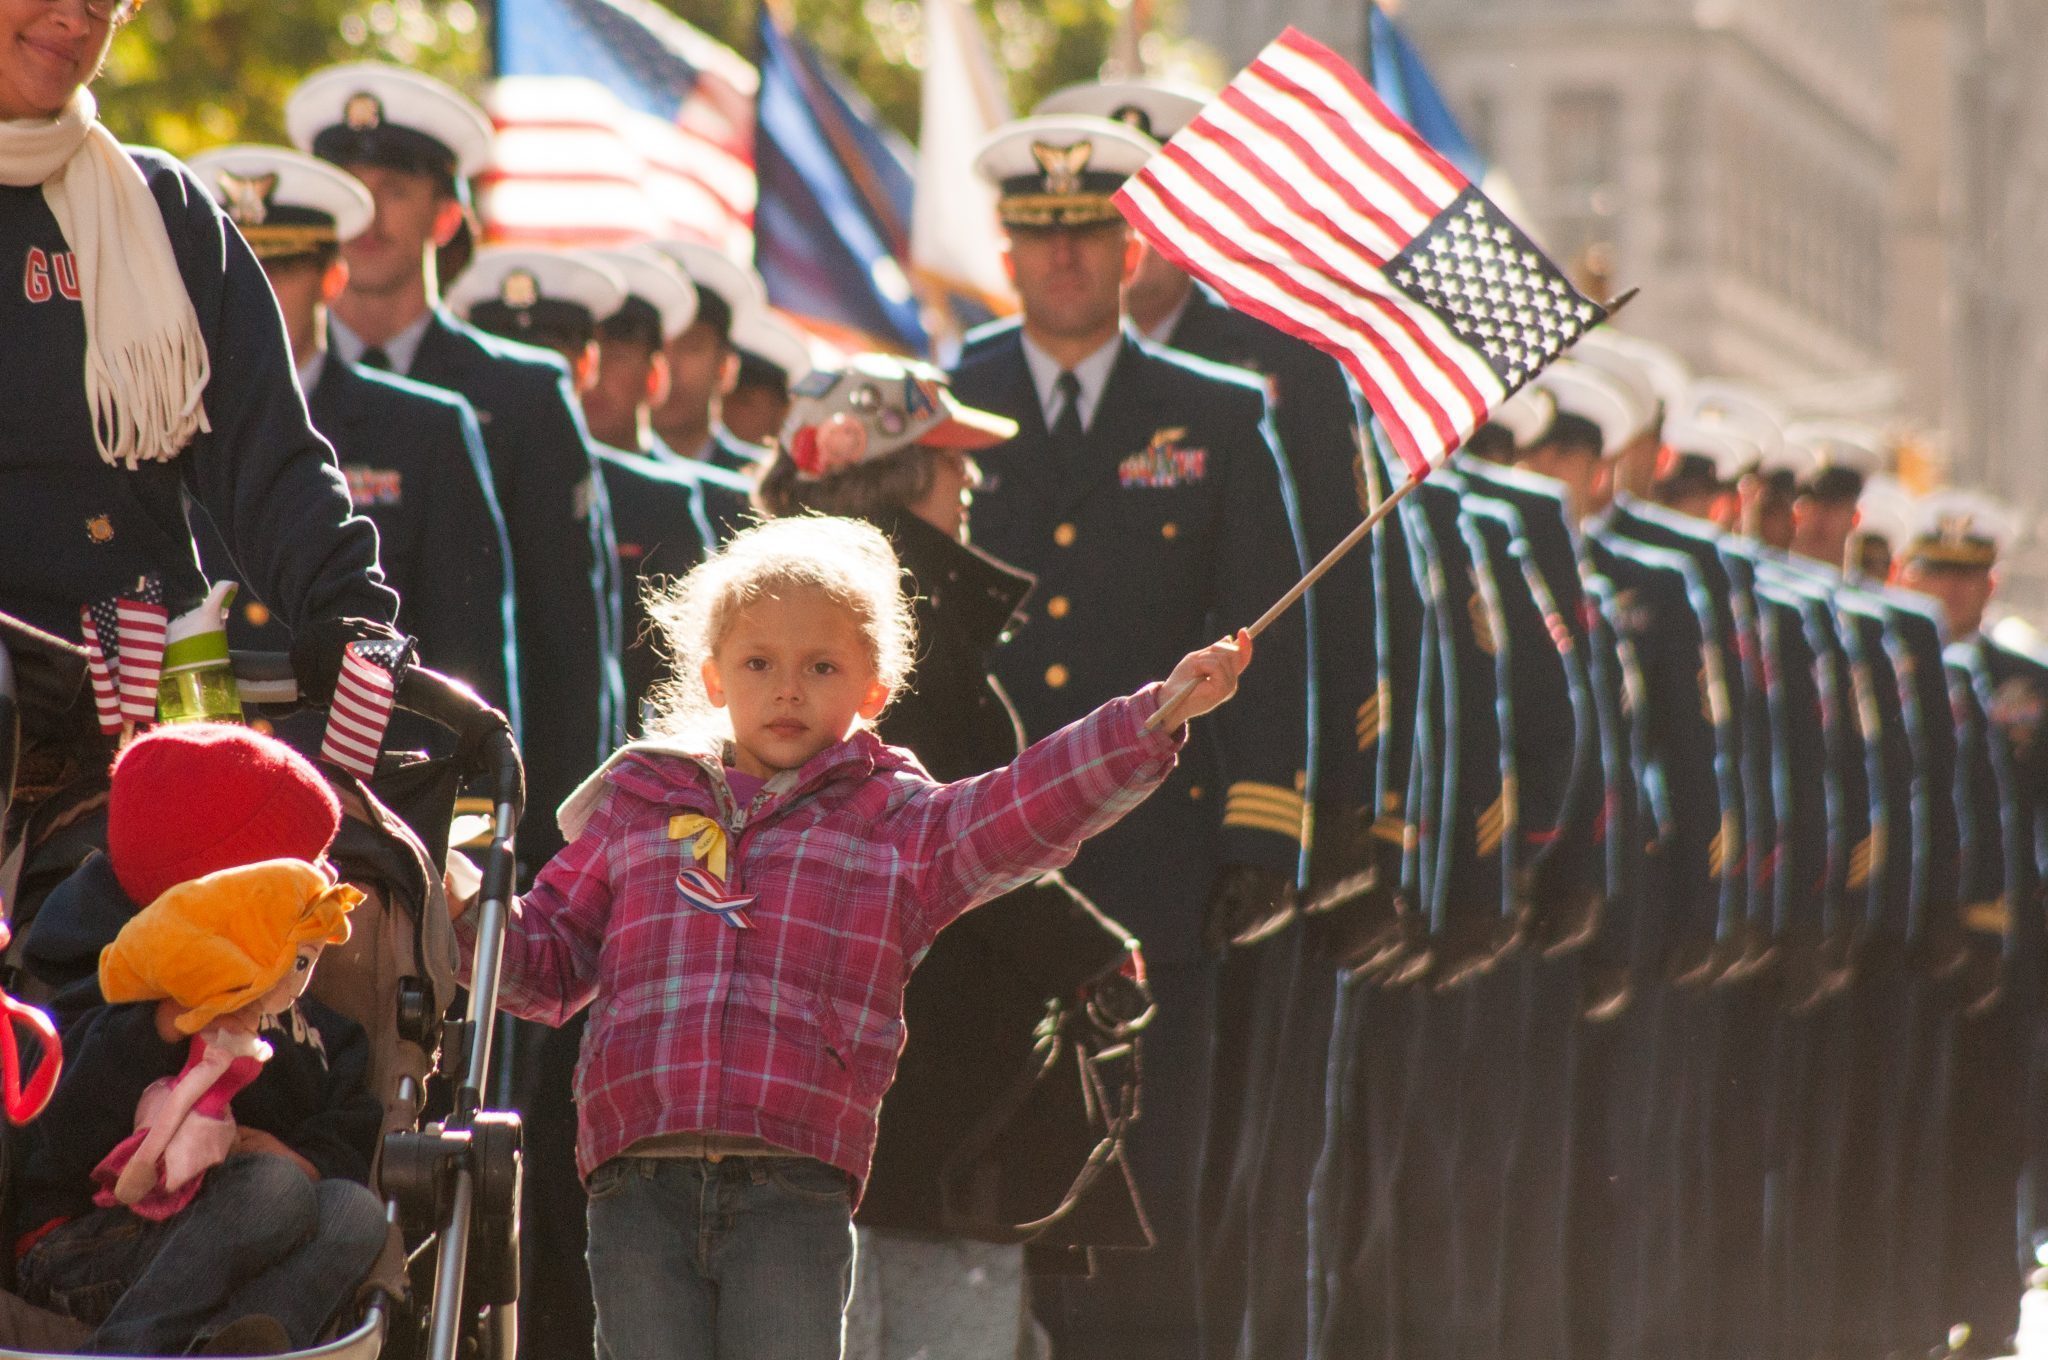 US Coast Guard families and service members march in New York City's Veterans Day Parade [Image 4 of 7]